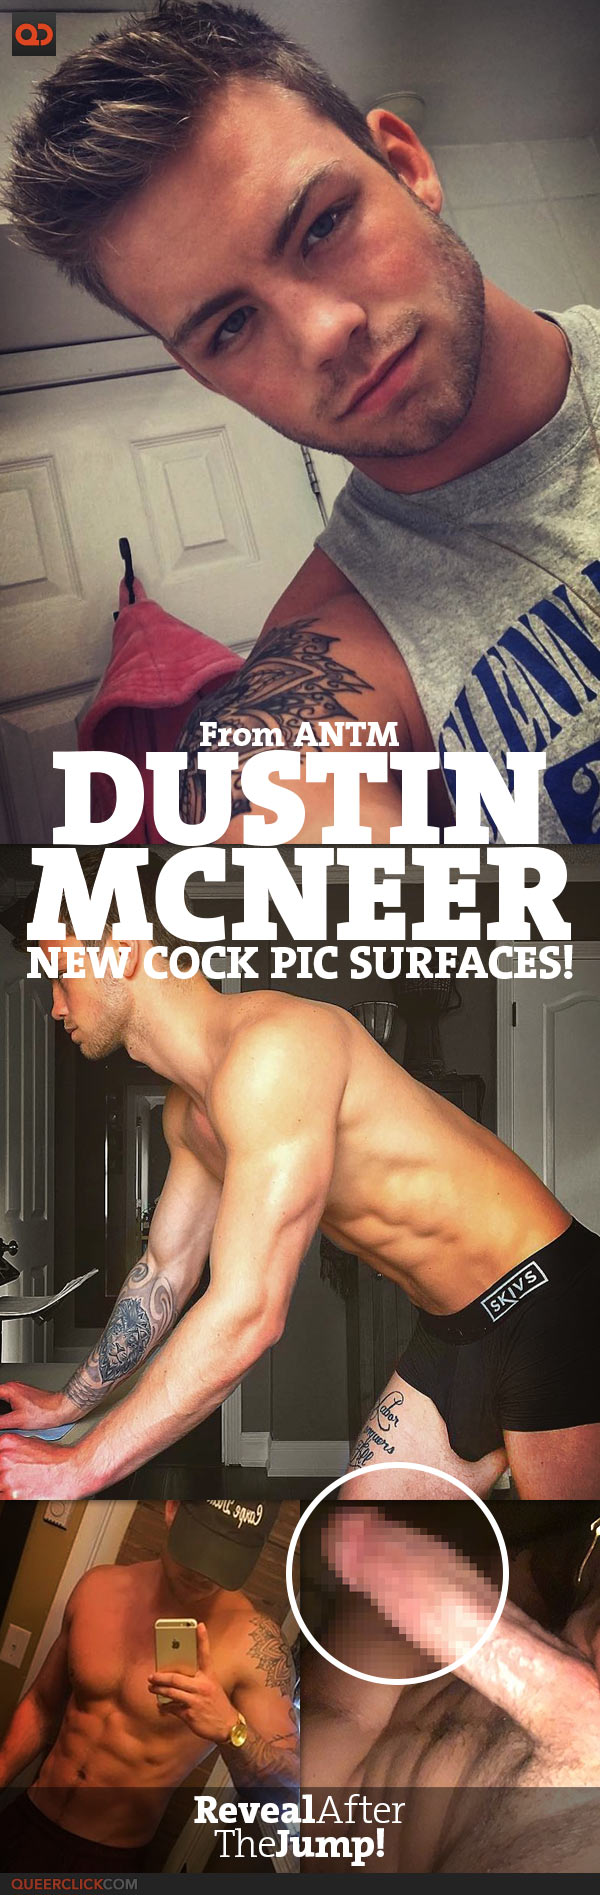 Free Sexy Dustin McNeer Exposing His Nude Butt and Cum On The ABS | Man Men